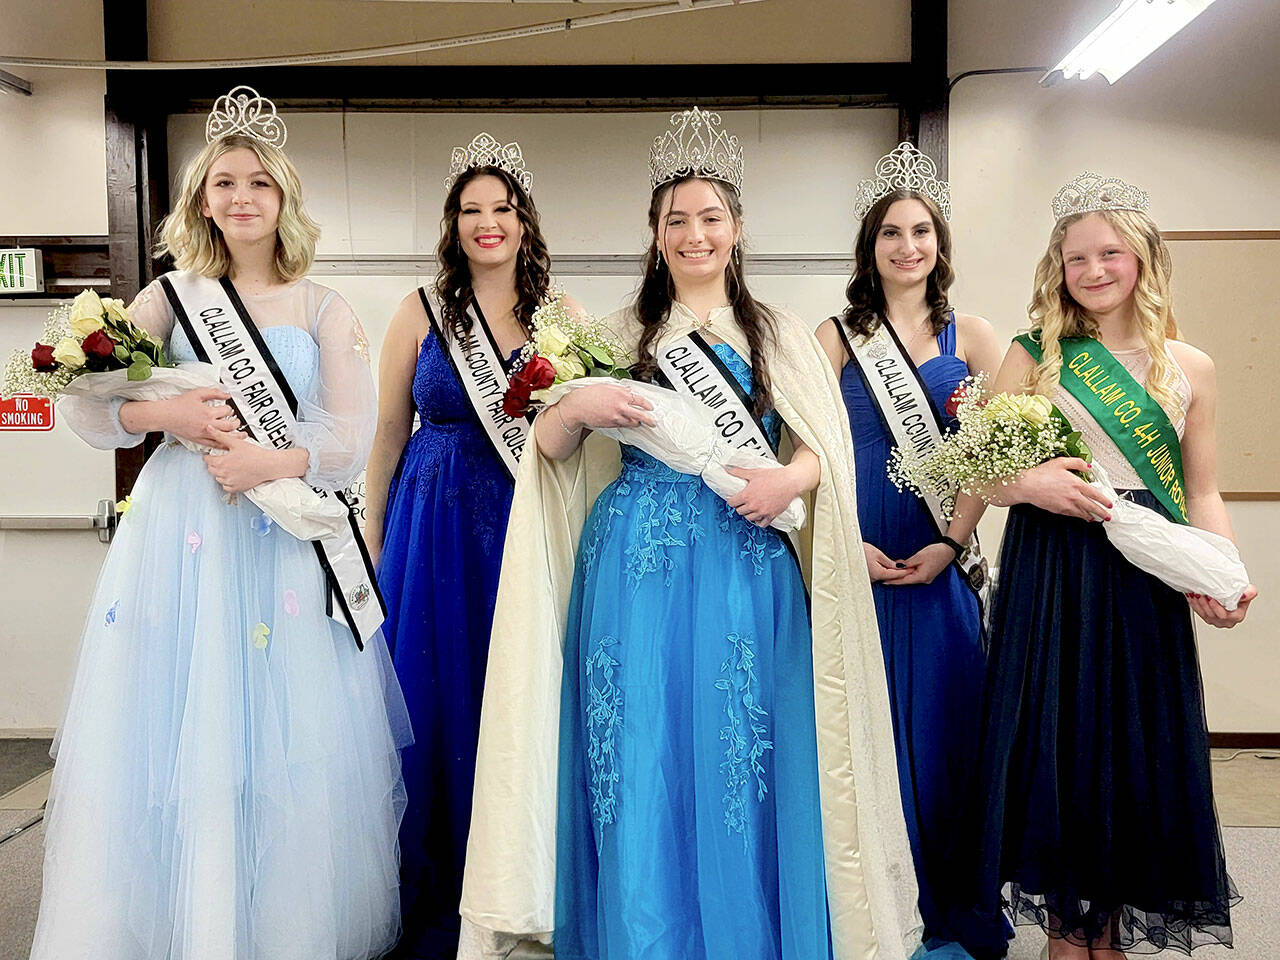 Pictured, left to right, are Sophia Lawson, 2022 queens court; Anna Menkal, 2020 queen; Allison Pettit, 2022 queen; Rebekah Parker, 2021 queen; and Kendall Adolphe, 2022 4H junior royalty.